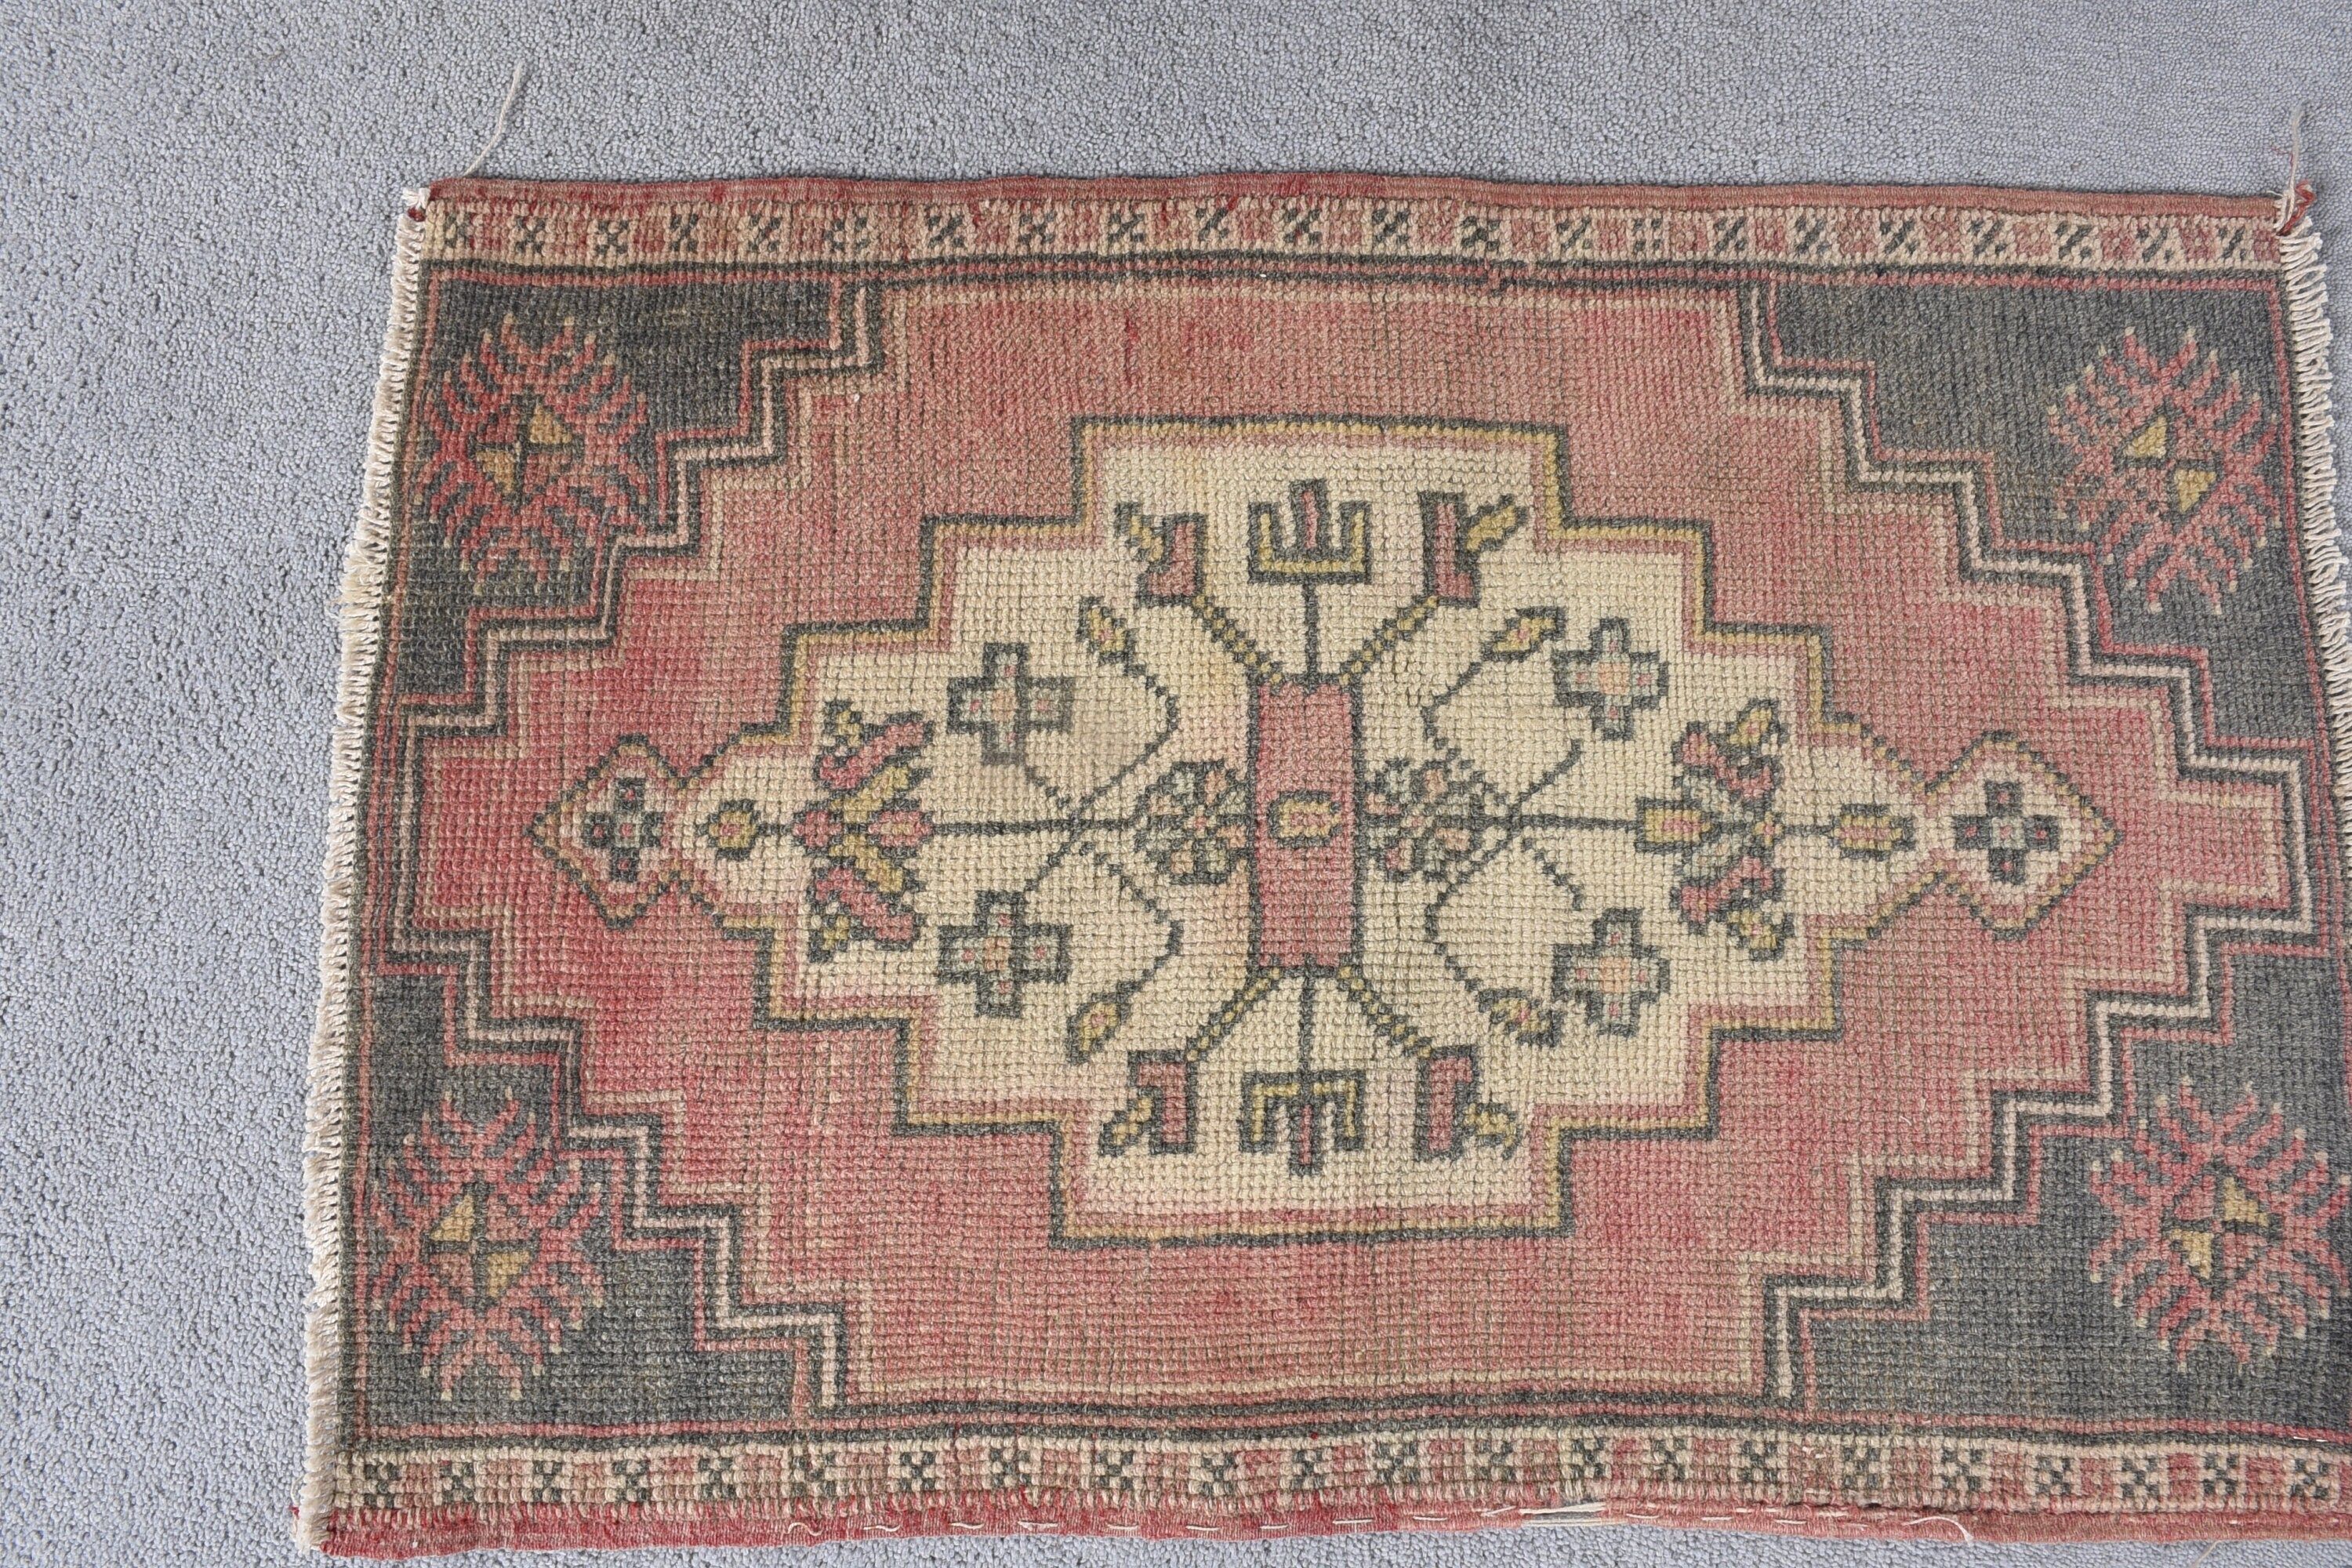 Red Antique Rug, Vintage Rug, Kitchen Rugs, Rugs for Bath, Wall Hanging Rug, Turkish Rug, Nursery Rugs, 1.7x2.5 ft Small Rug